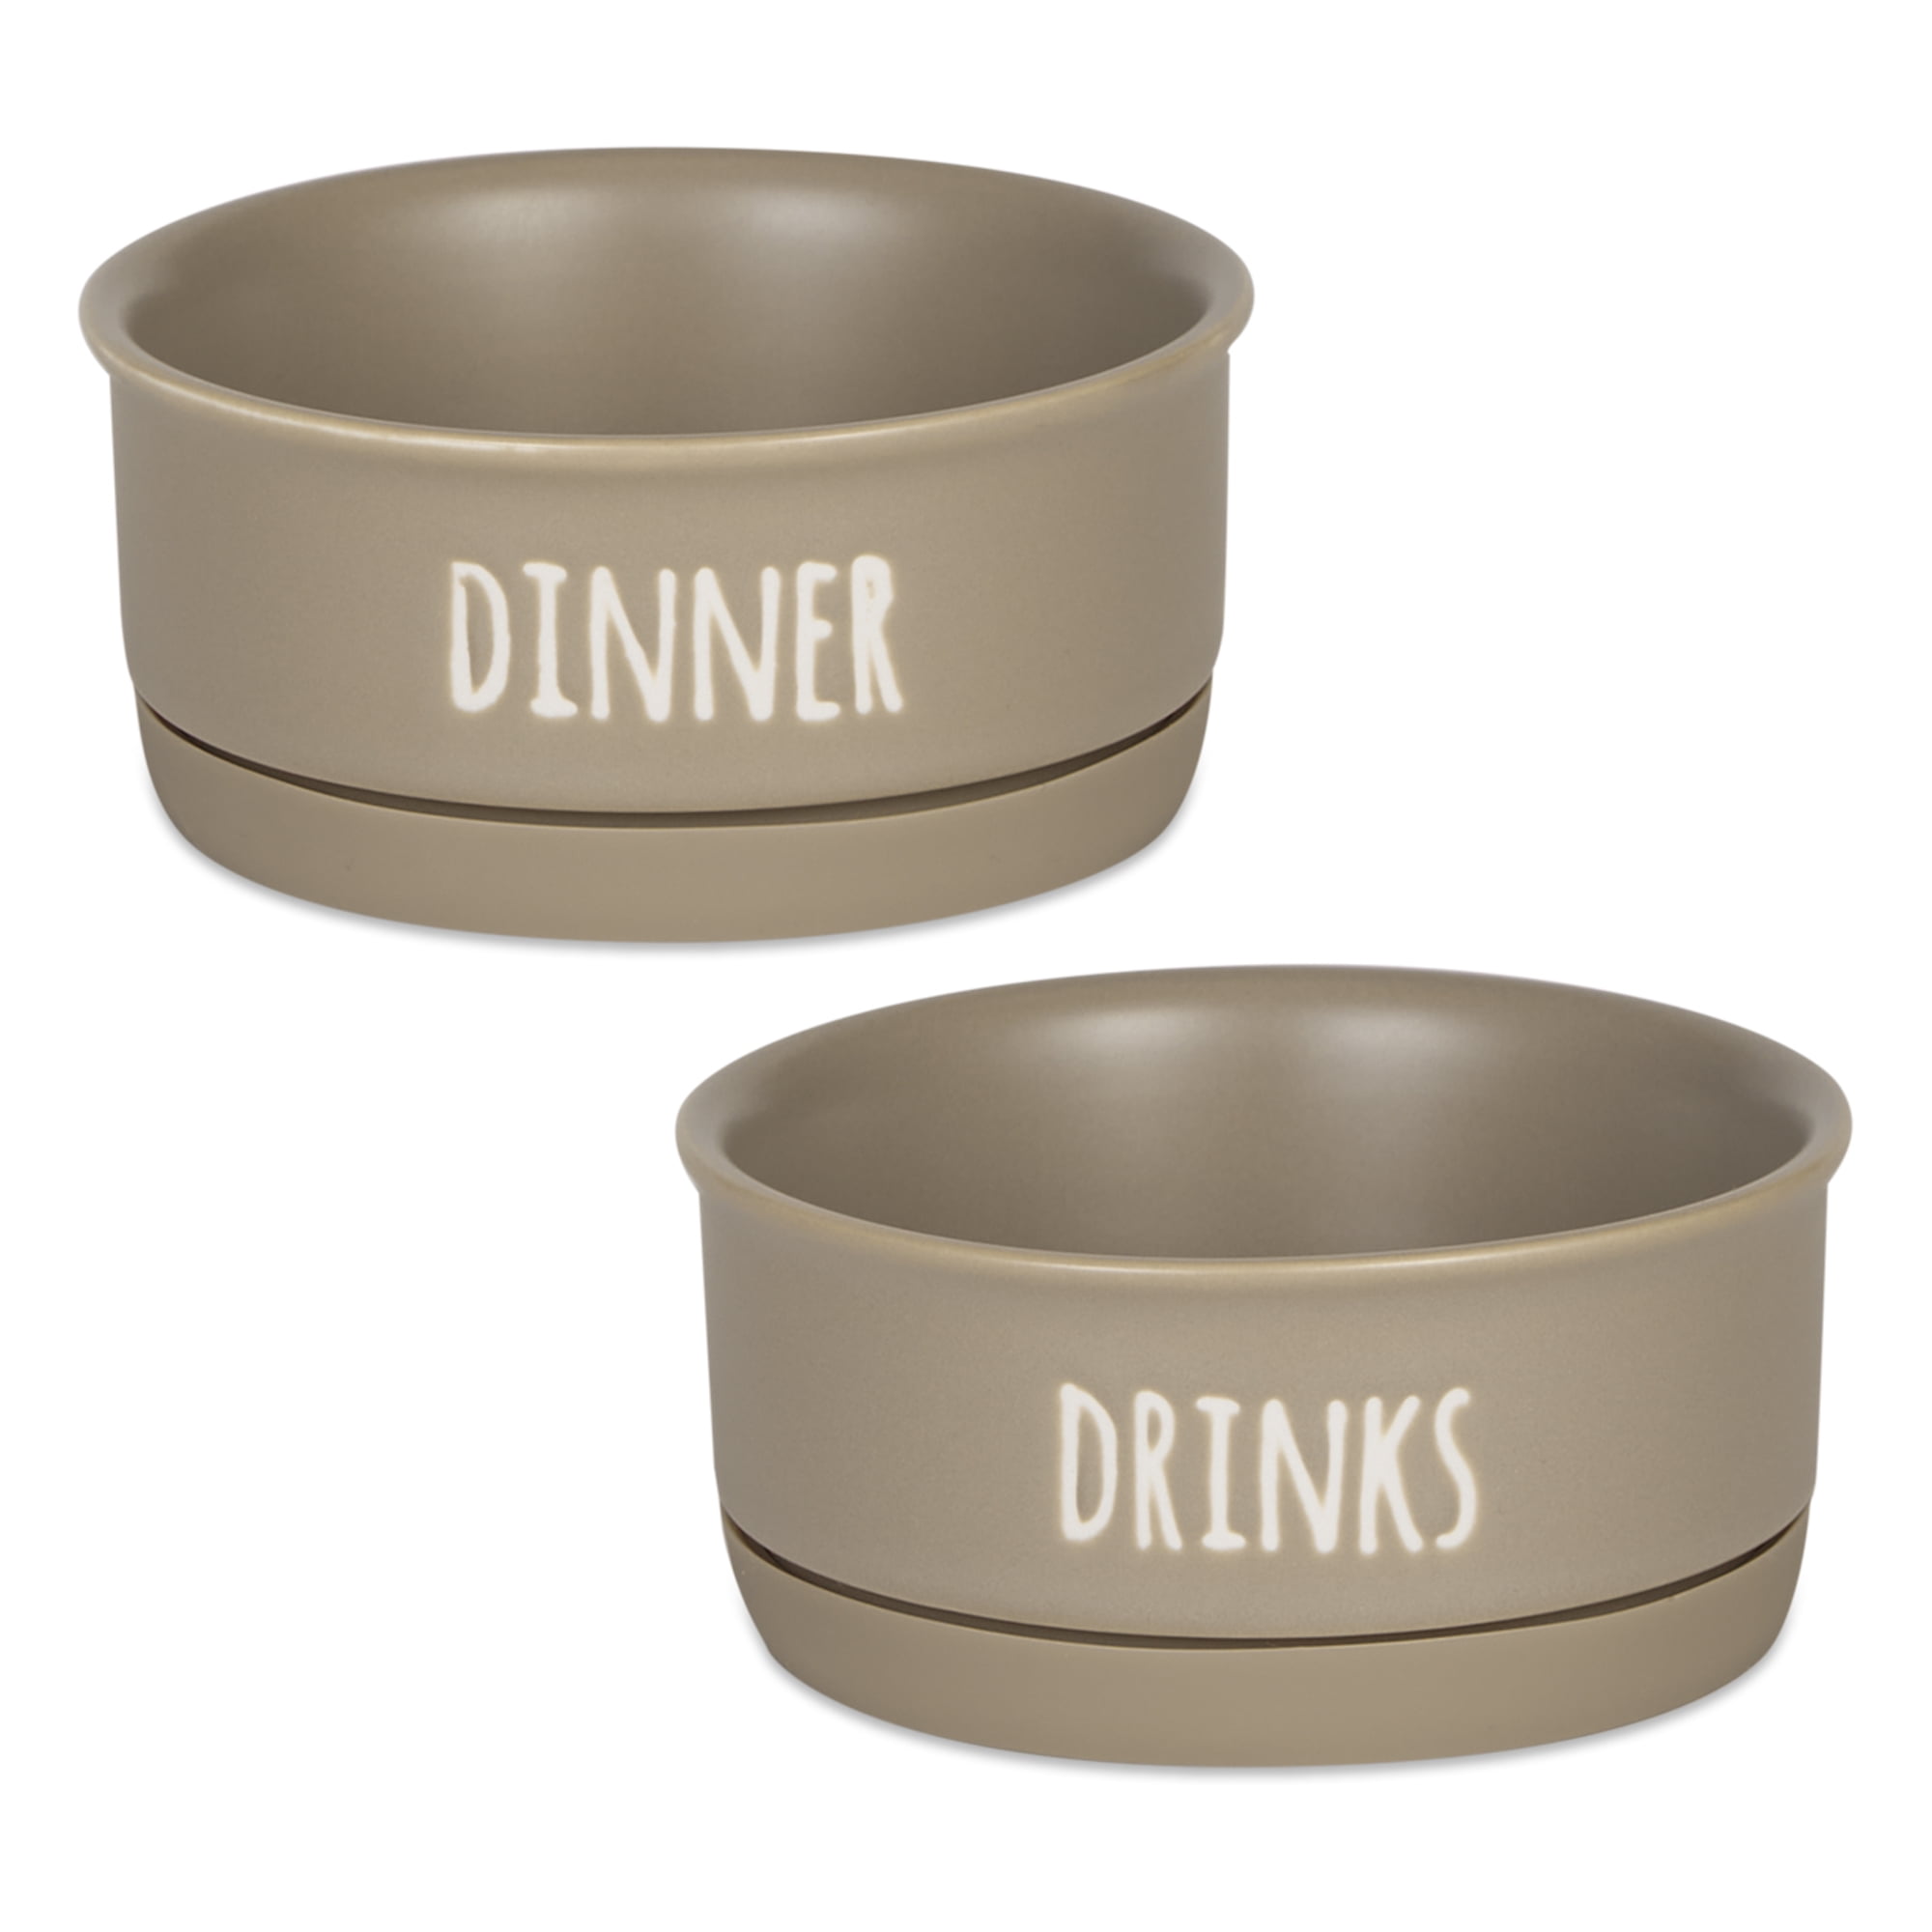 Double Low Pet Water or Food Bowls 8 Ounces (1 Cup) - black, tan, light  brown, dark brown, light grey, dark grey, hunter green, blue, red or pink.